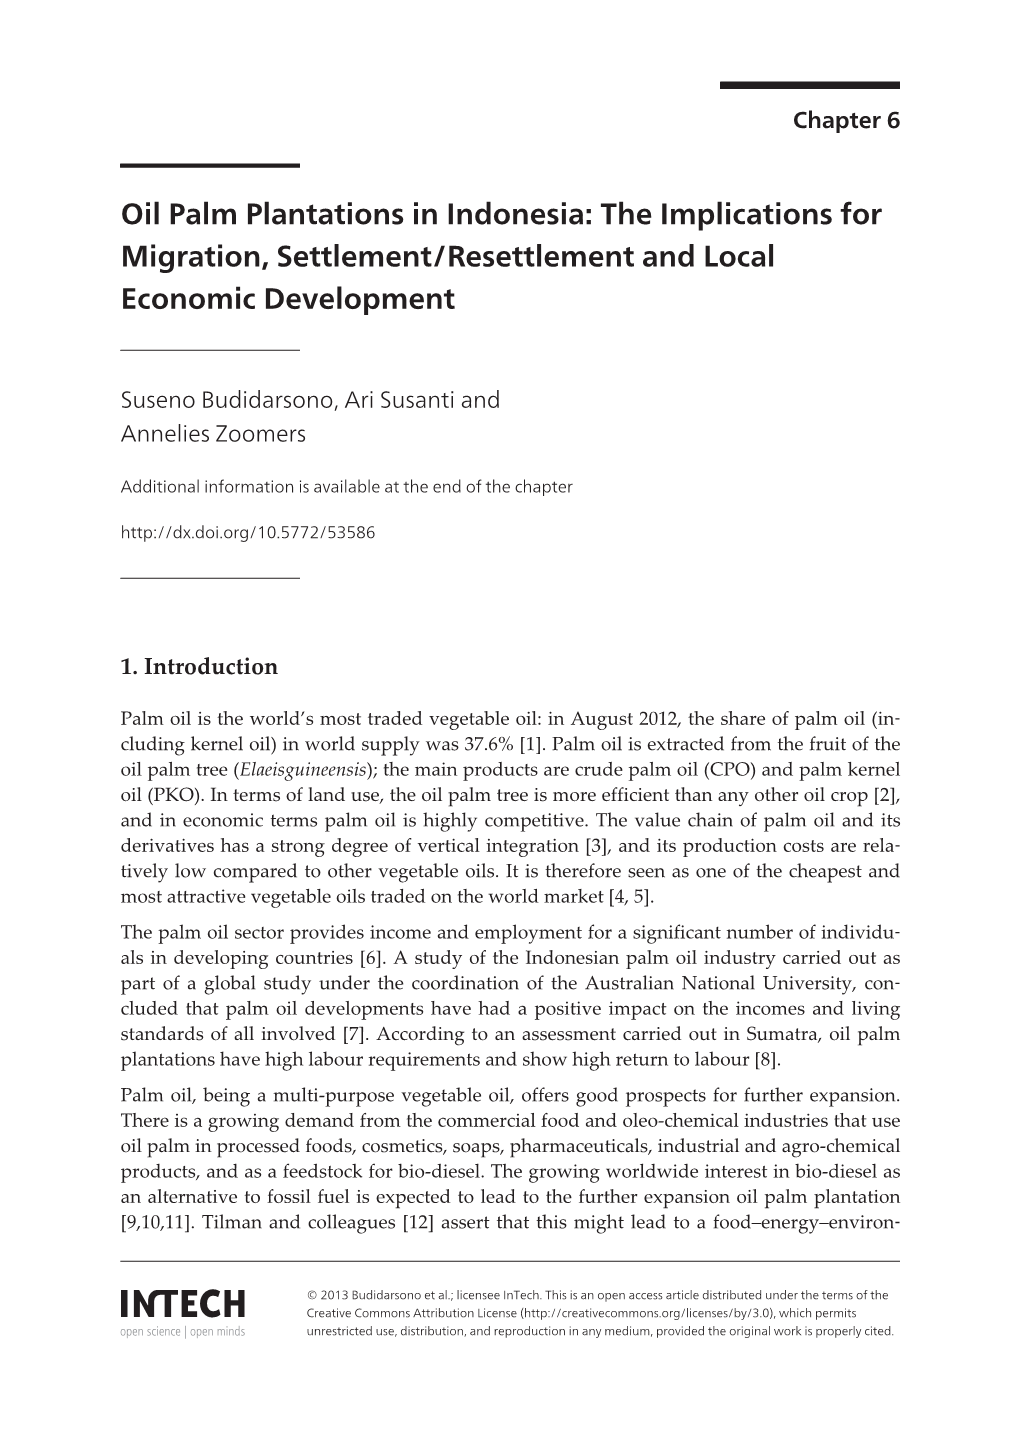 Oil Palm Plantations in Indonesia: the Implications for Migration, Settlement/Resettlement and Local Economic Development